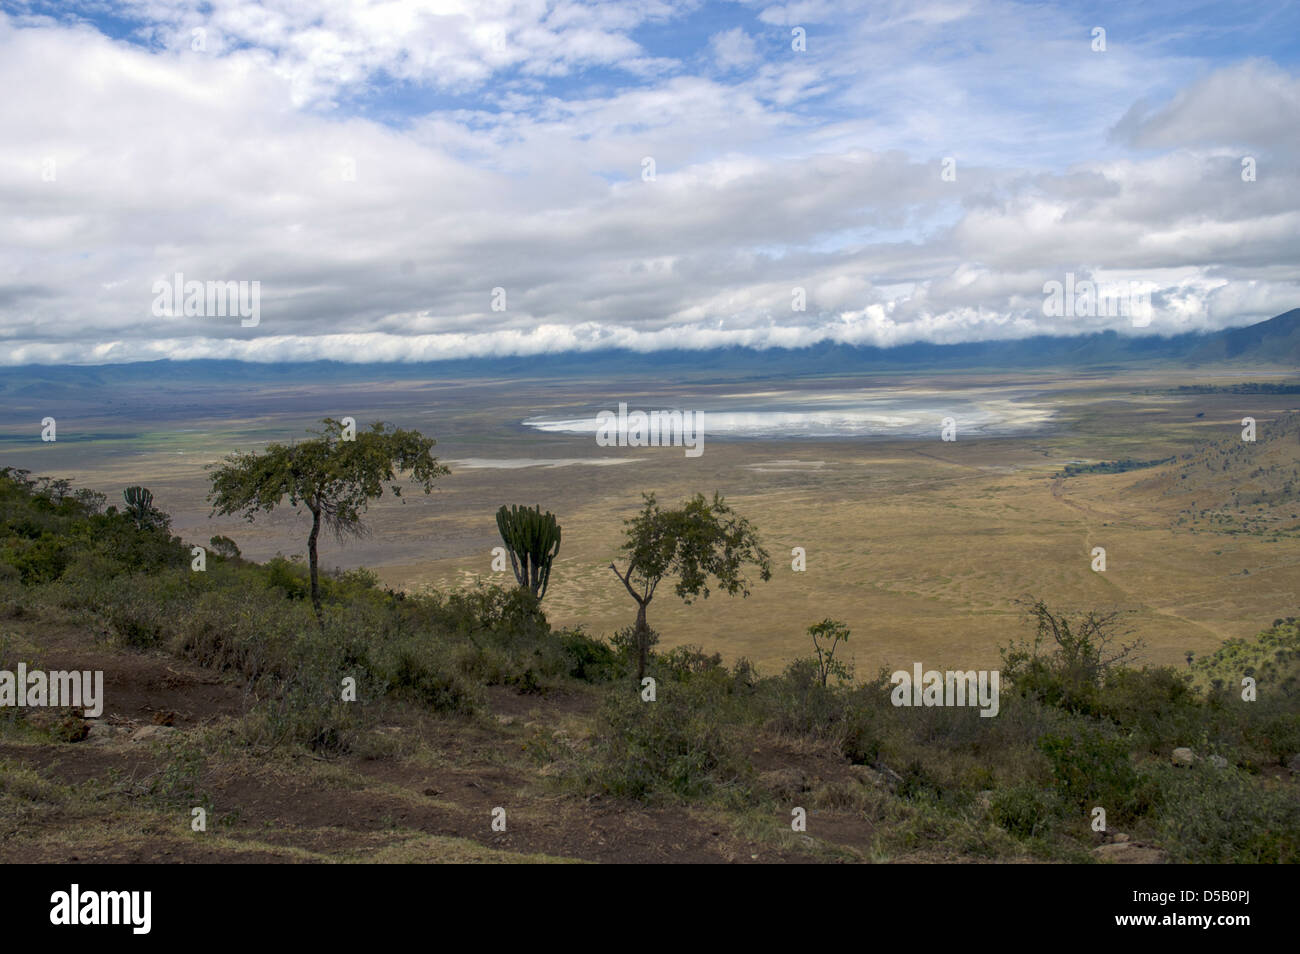 Africa, Tanzania, ngorongoro crater a view of the geological formation Stock Photo